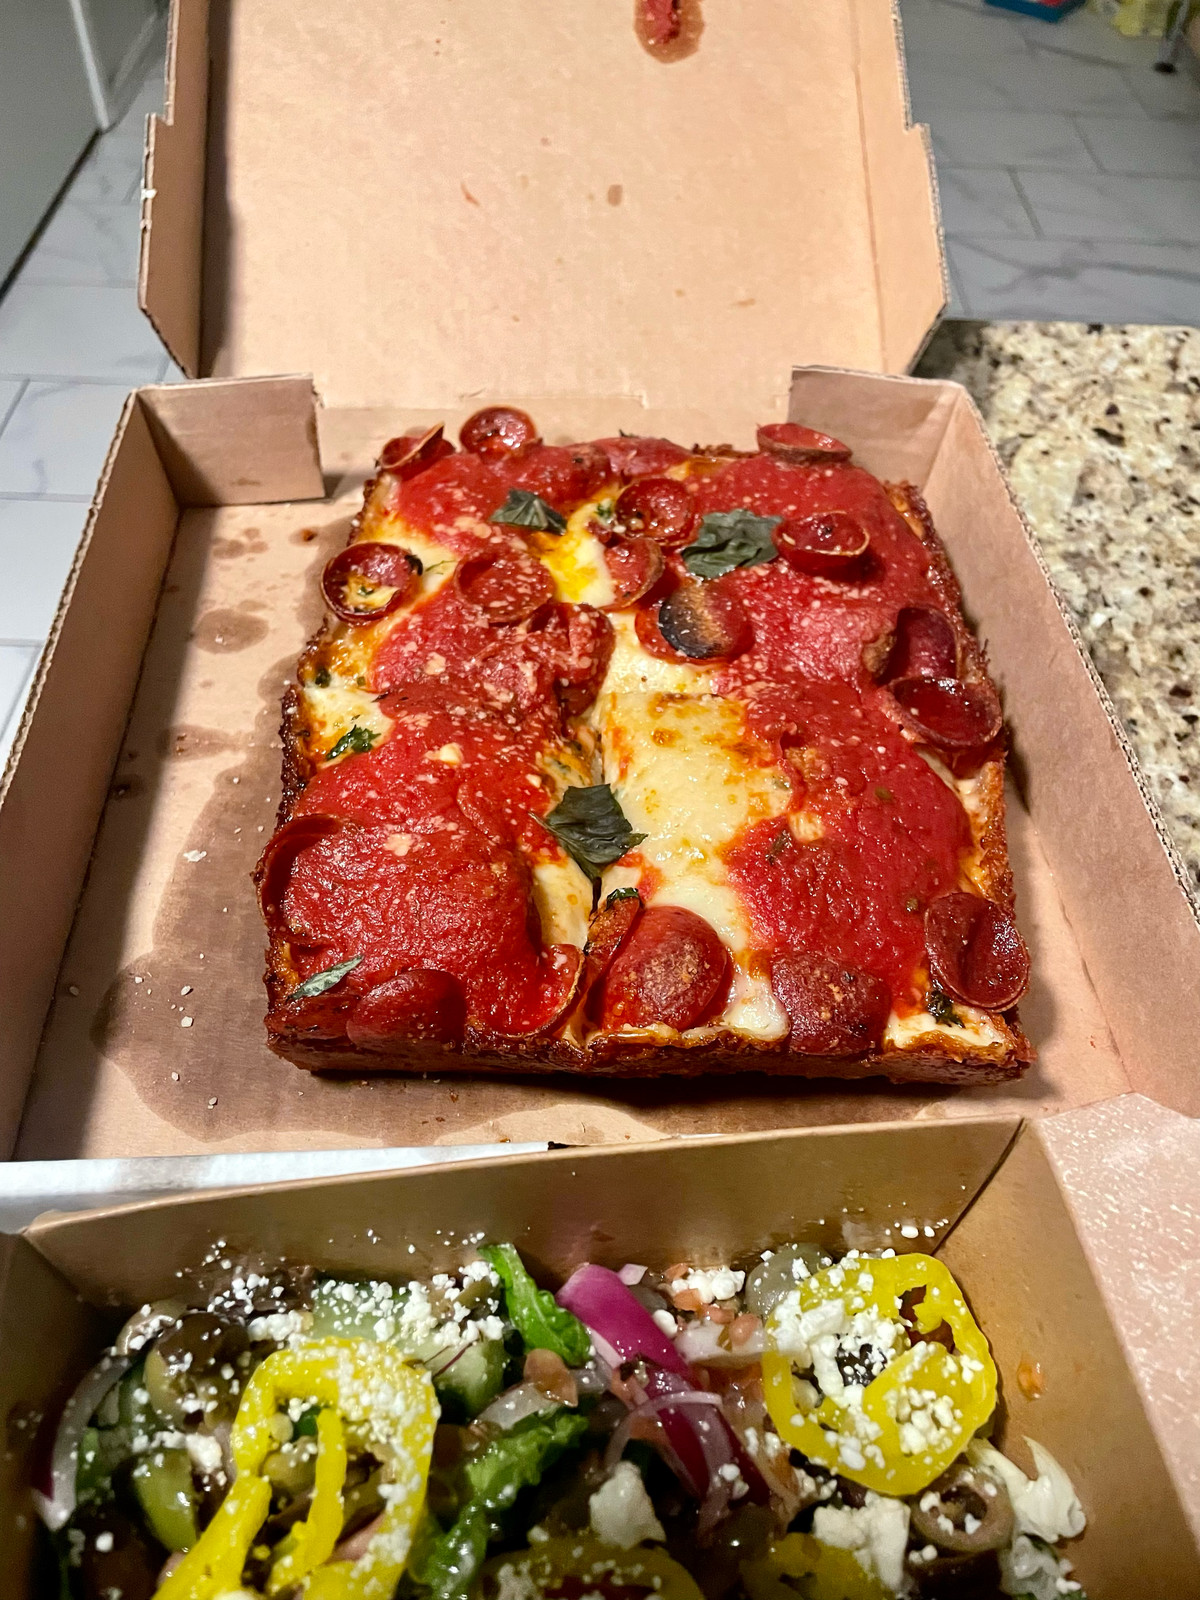 In the back, a pepperoni deep dish pizza sits in an open delivery box. In the foreground is a Greek salad with vibrant green banana peppers.